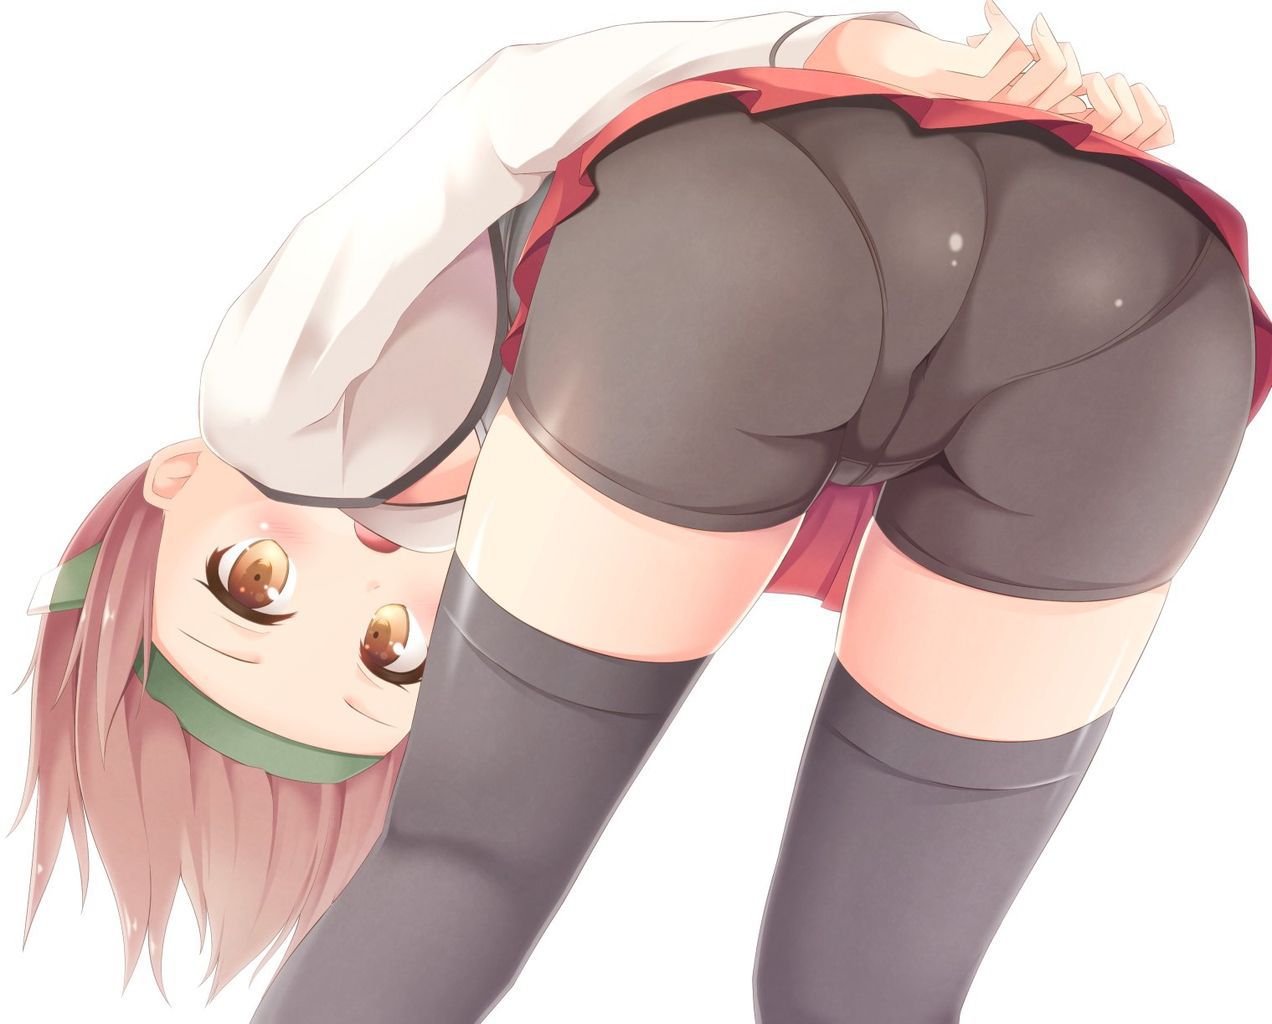 Secondary erotic pitch rickets of girls wearing spats is a image summary 22